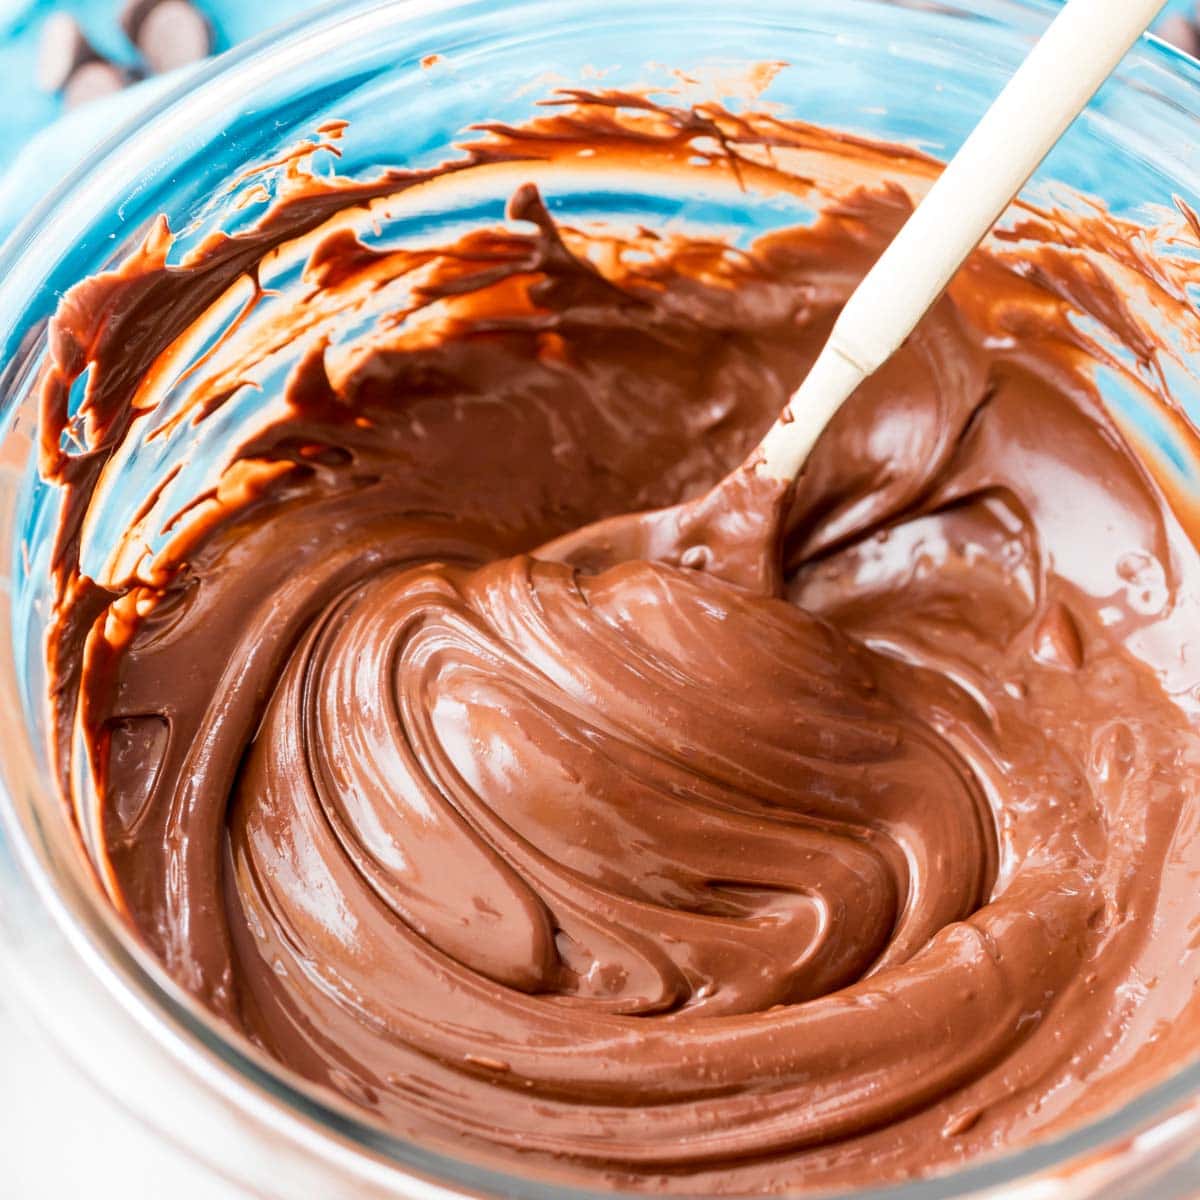 Tips for melting chocolate